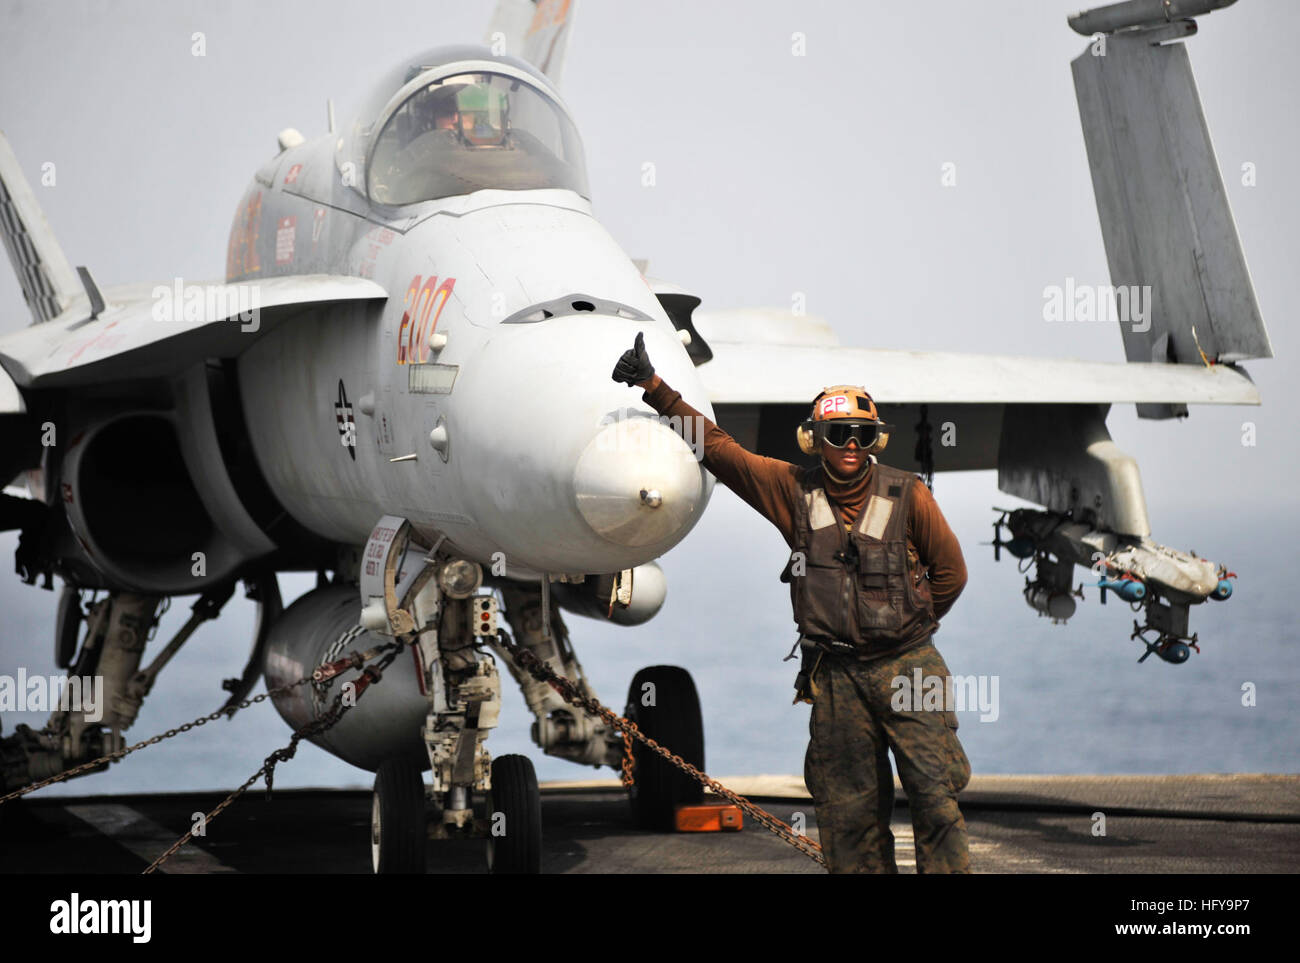 A plane captain assigned to the Checkerboards of Marine Fighter Attack Squadron 312 gives a thumbs-up to signal that the F/A-18C Hornet is ready to be moved to the catapult for take-off aboard the aircraft carrier USS Harry S. Truman. VMFA-312 is deployed as part of the Harry S. Truman Carrier Strike Group supporting maritime security operations and theater security cooperation efforts in the U.S. 5th Fleet area of responsibility. USS Harry S. Truman action DVIDS296680 Stock Photo